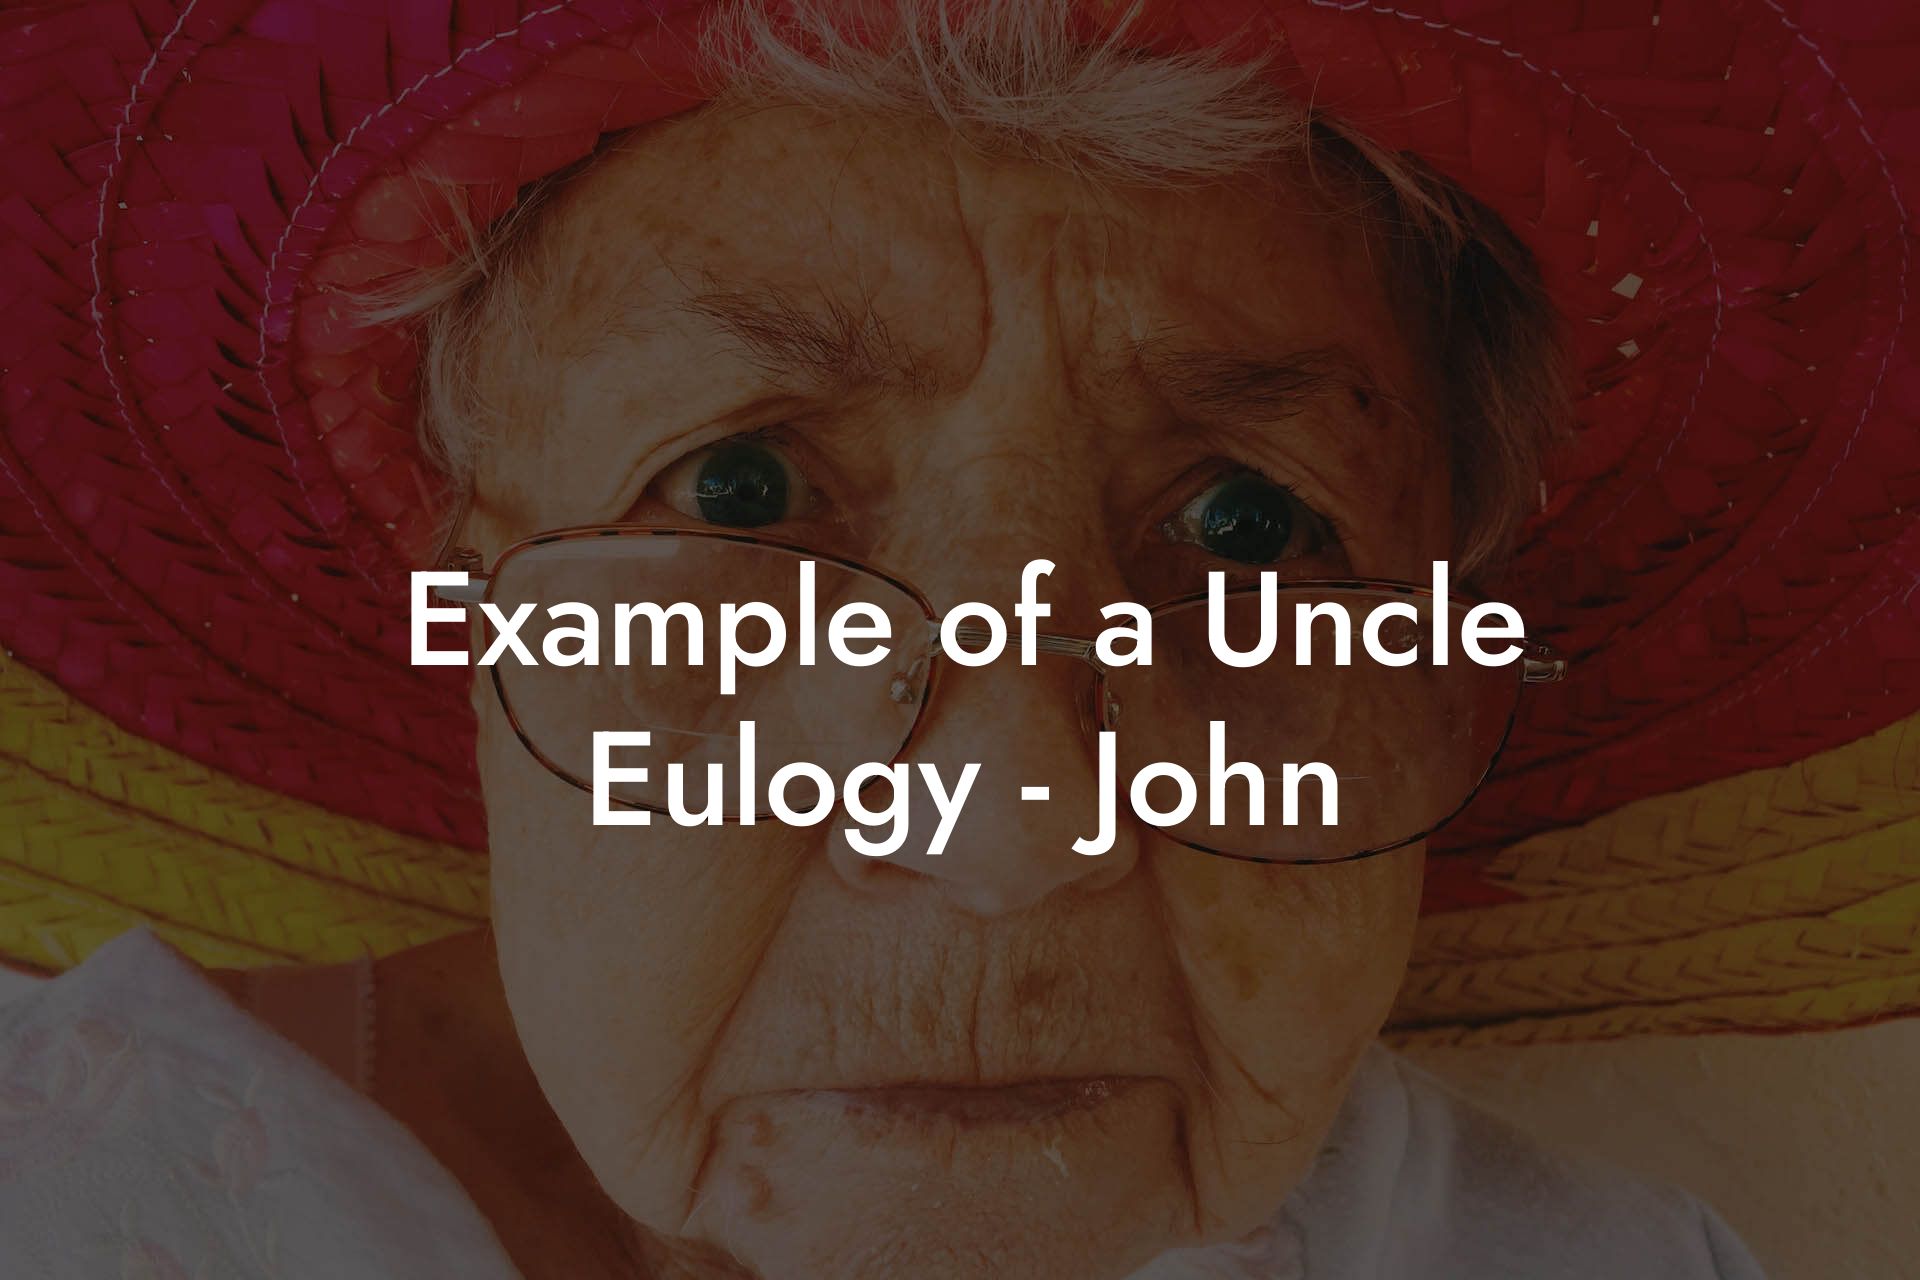 Example of a Uncle Eulogy - John